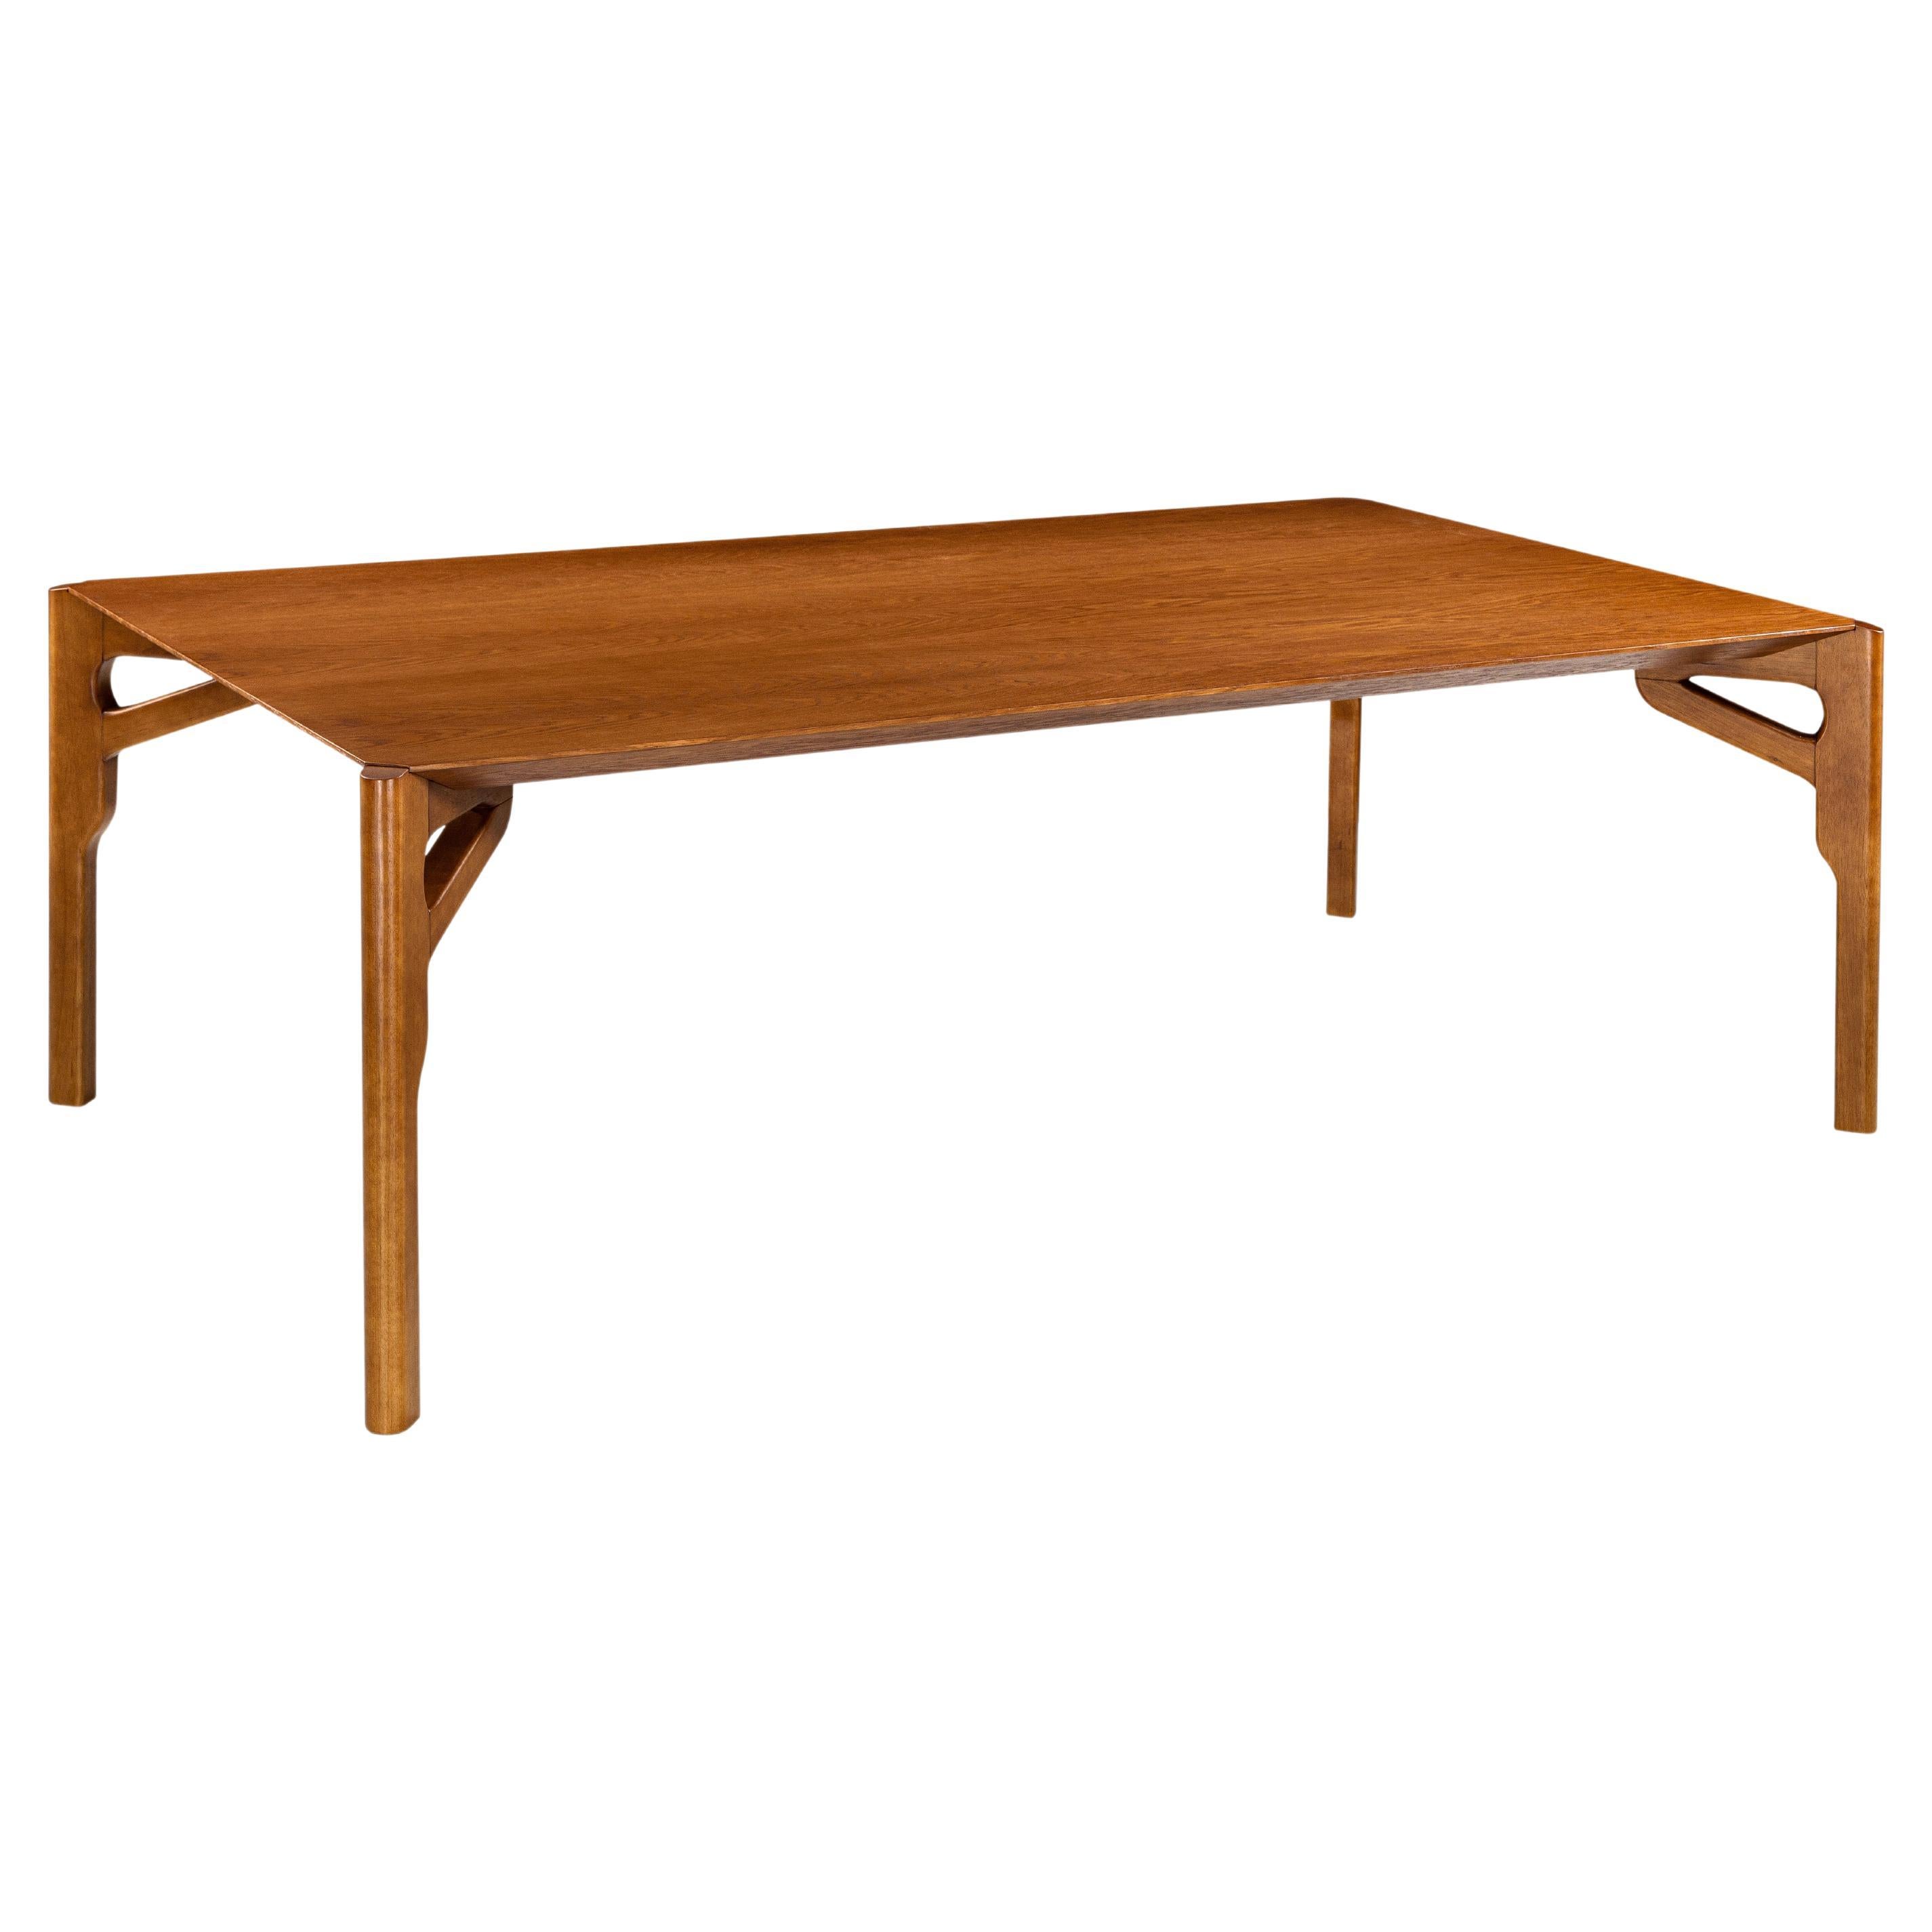 Hawk Dining Table with an Almond Oak Wood Veneered Table Top 86''